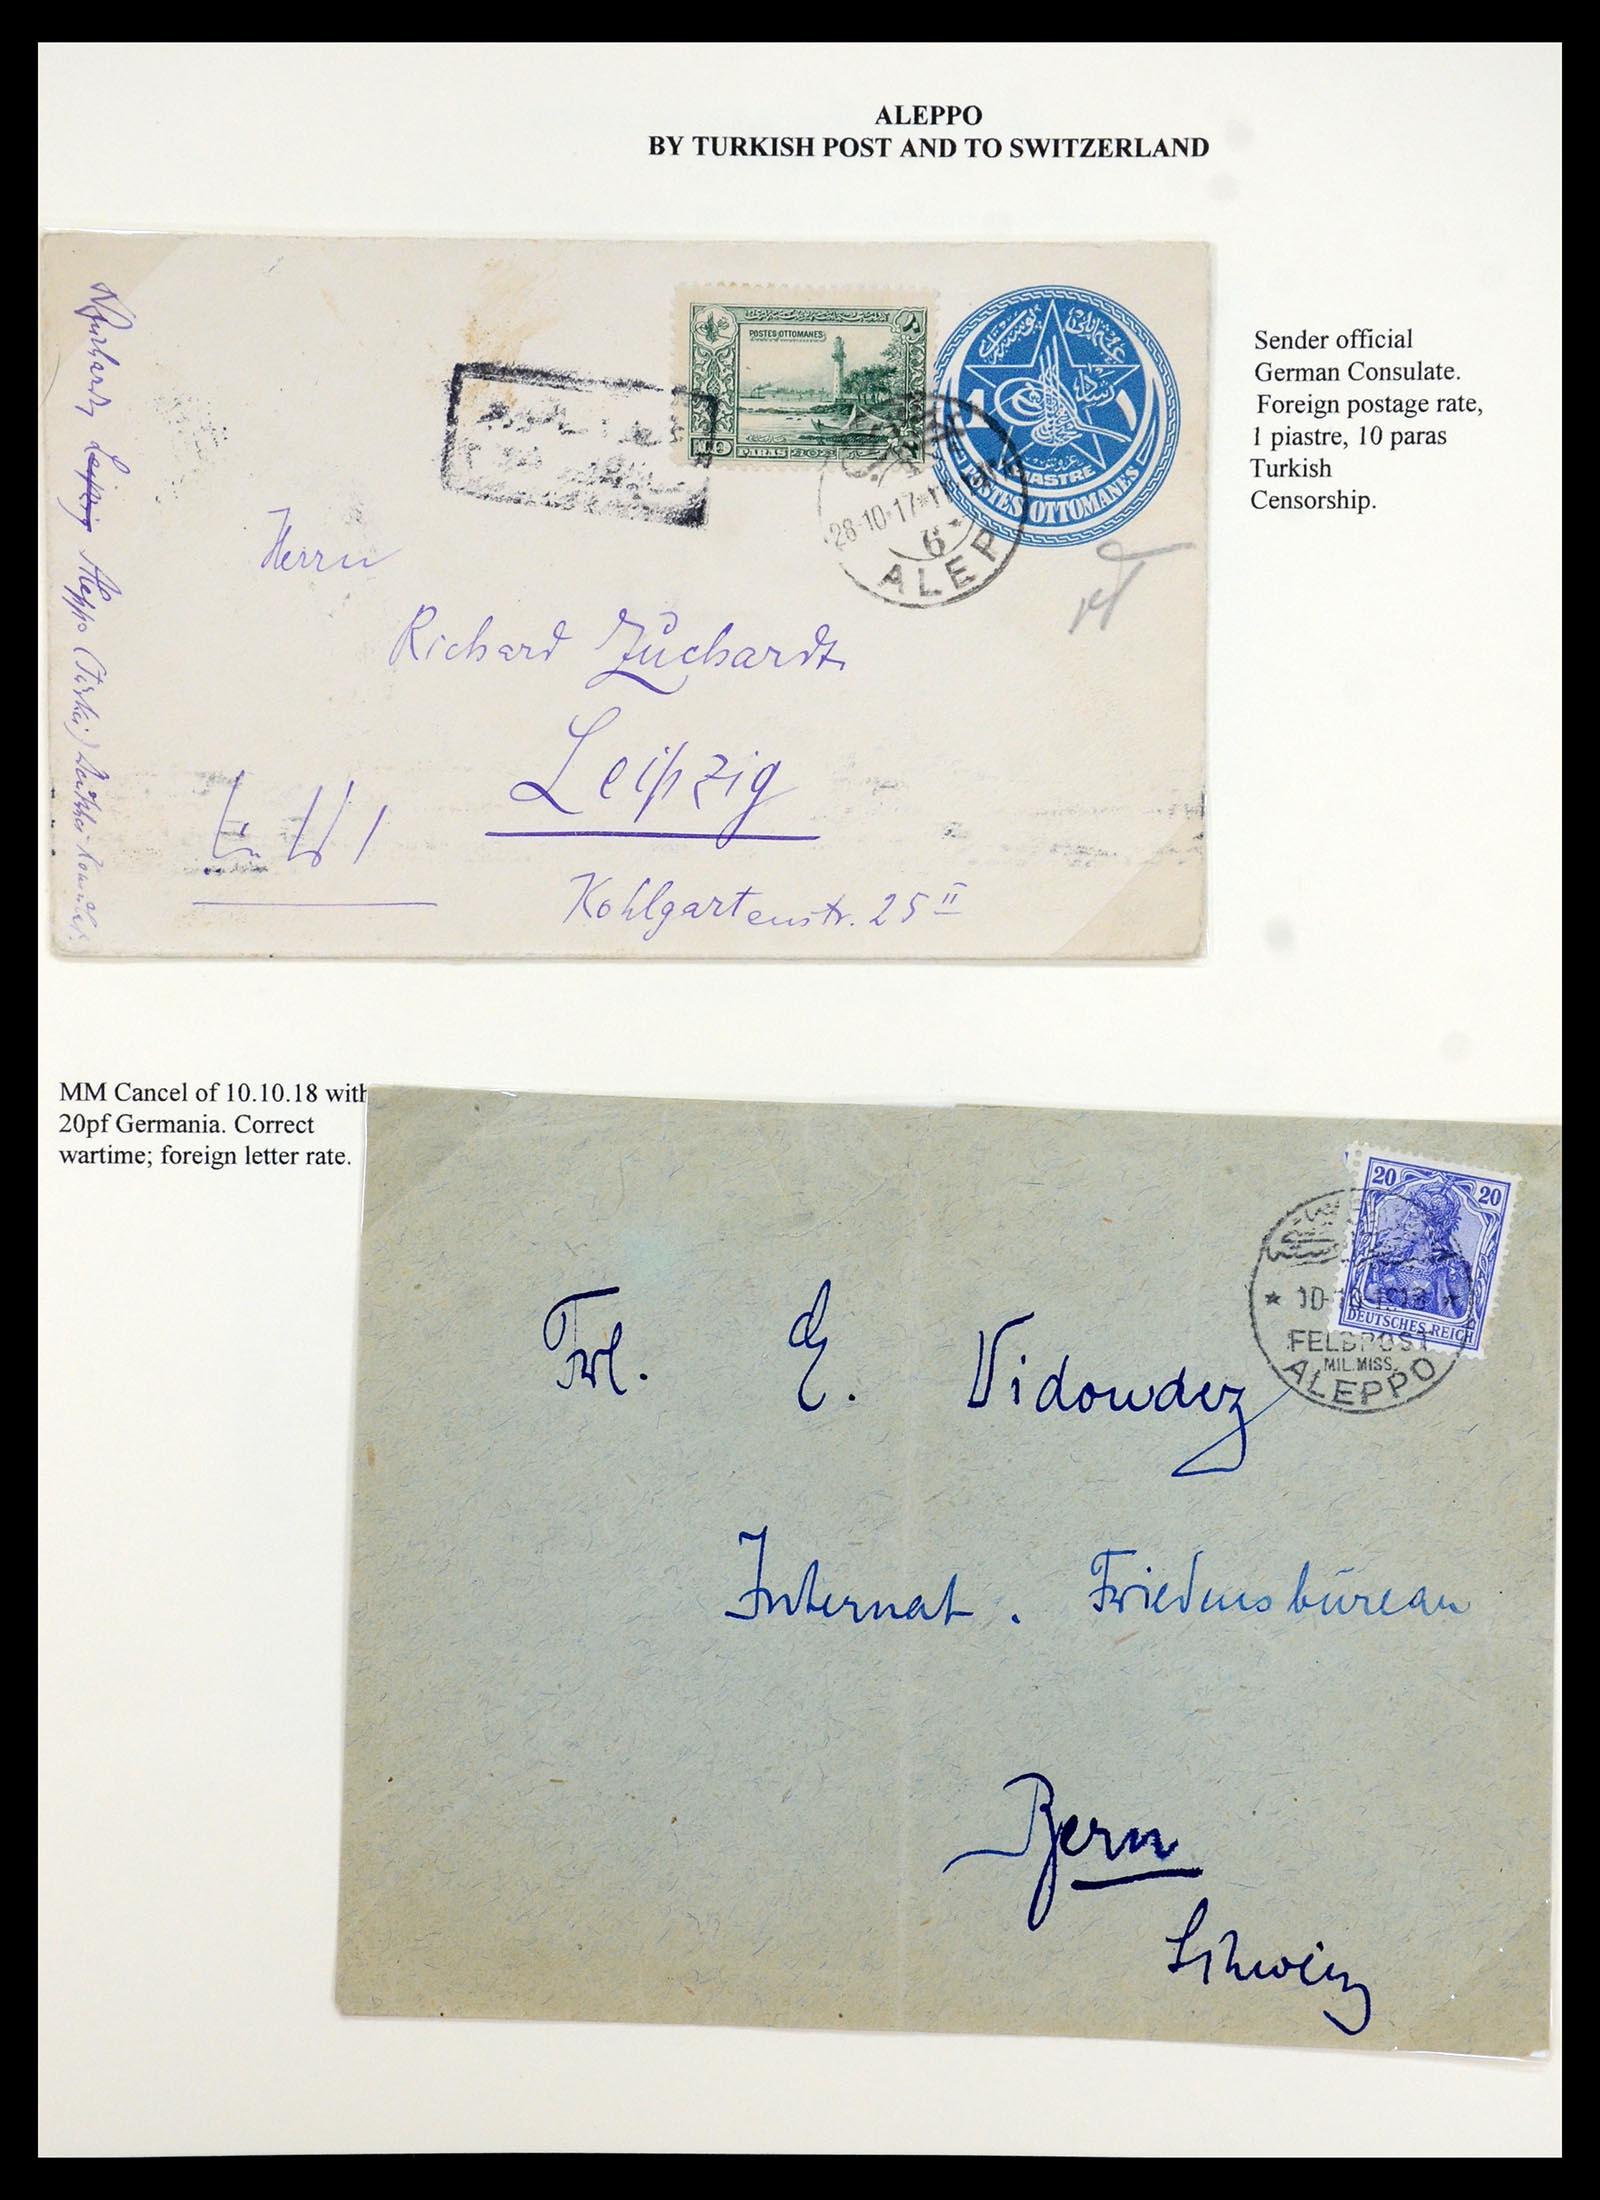 35515 011 - Stamp Collection 35515 Germany covers og Military mission in Turkey 1914